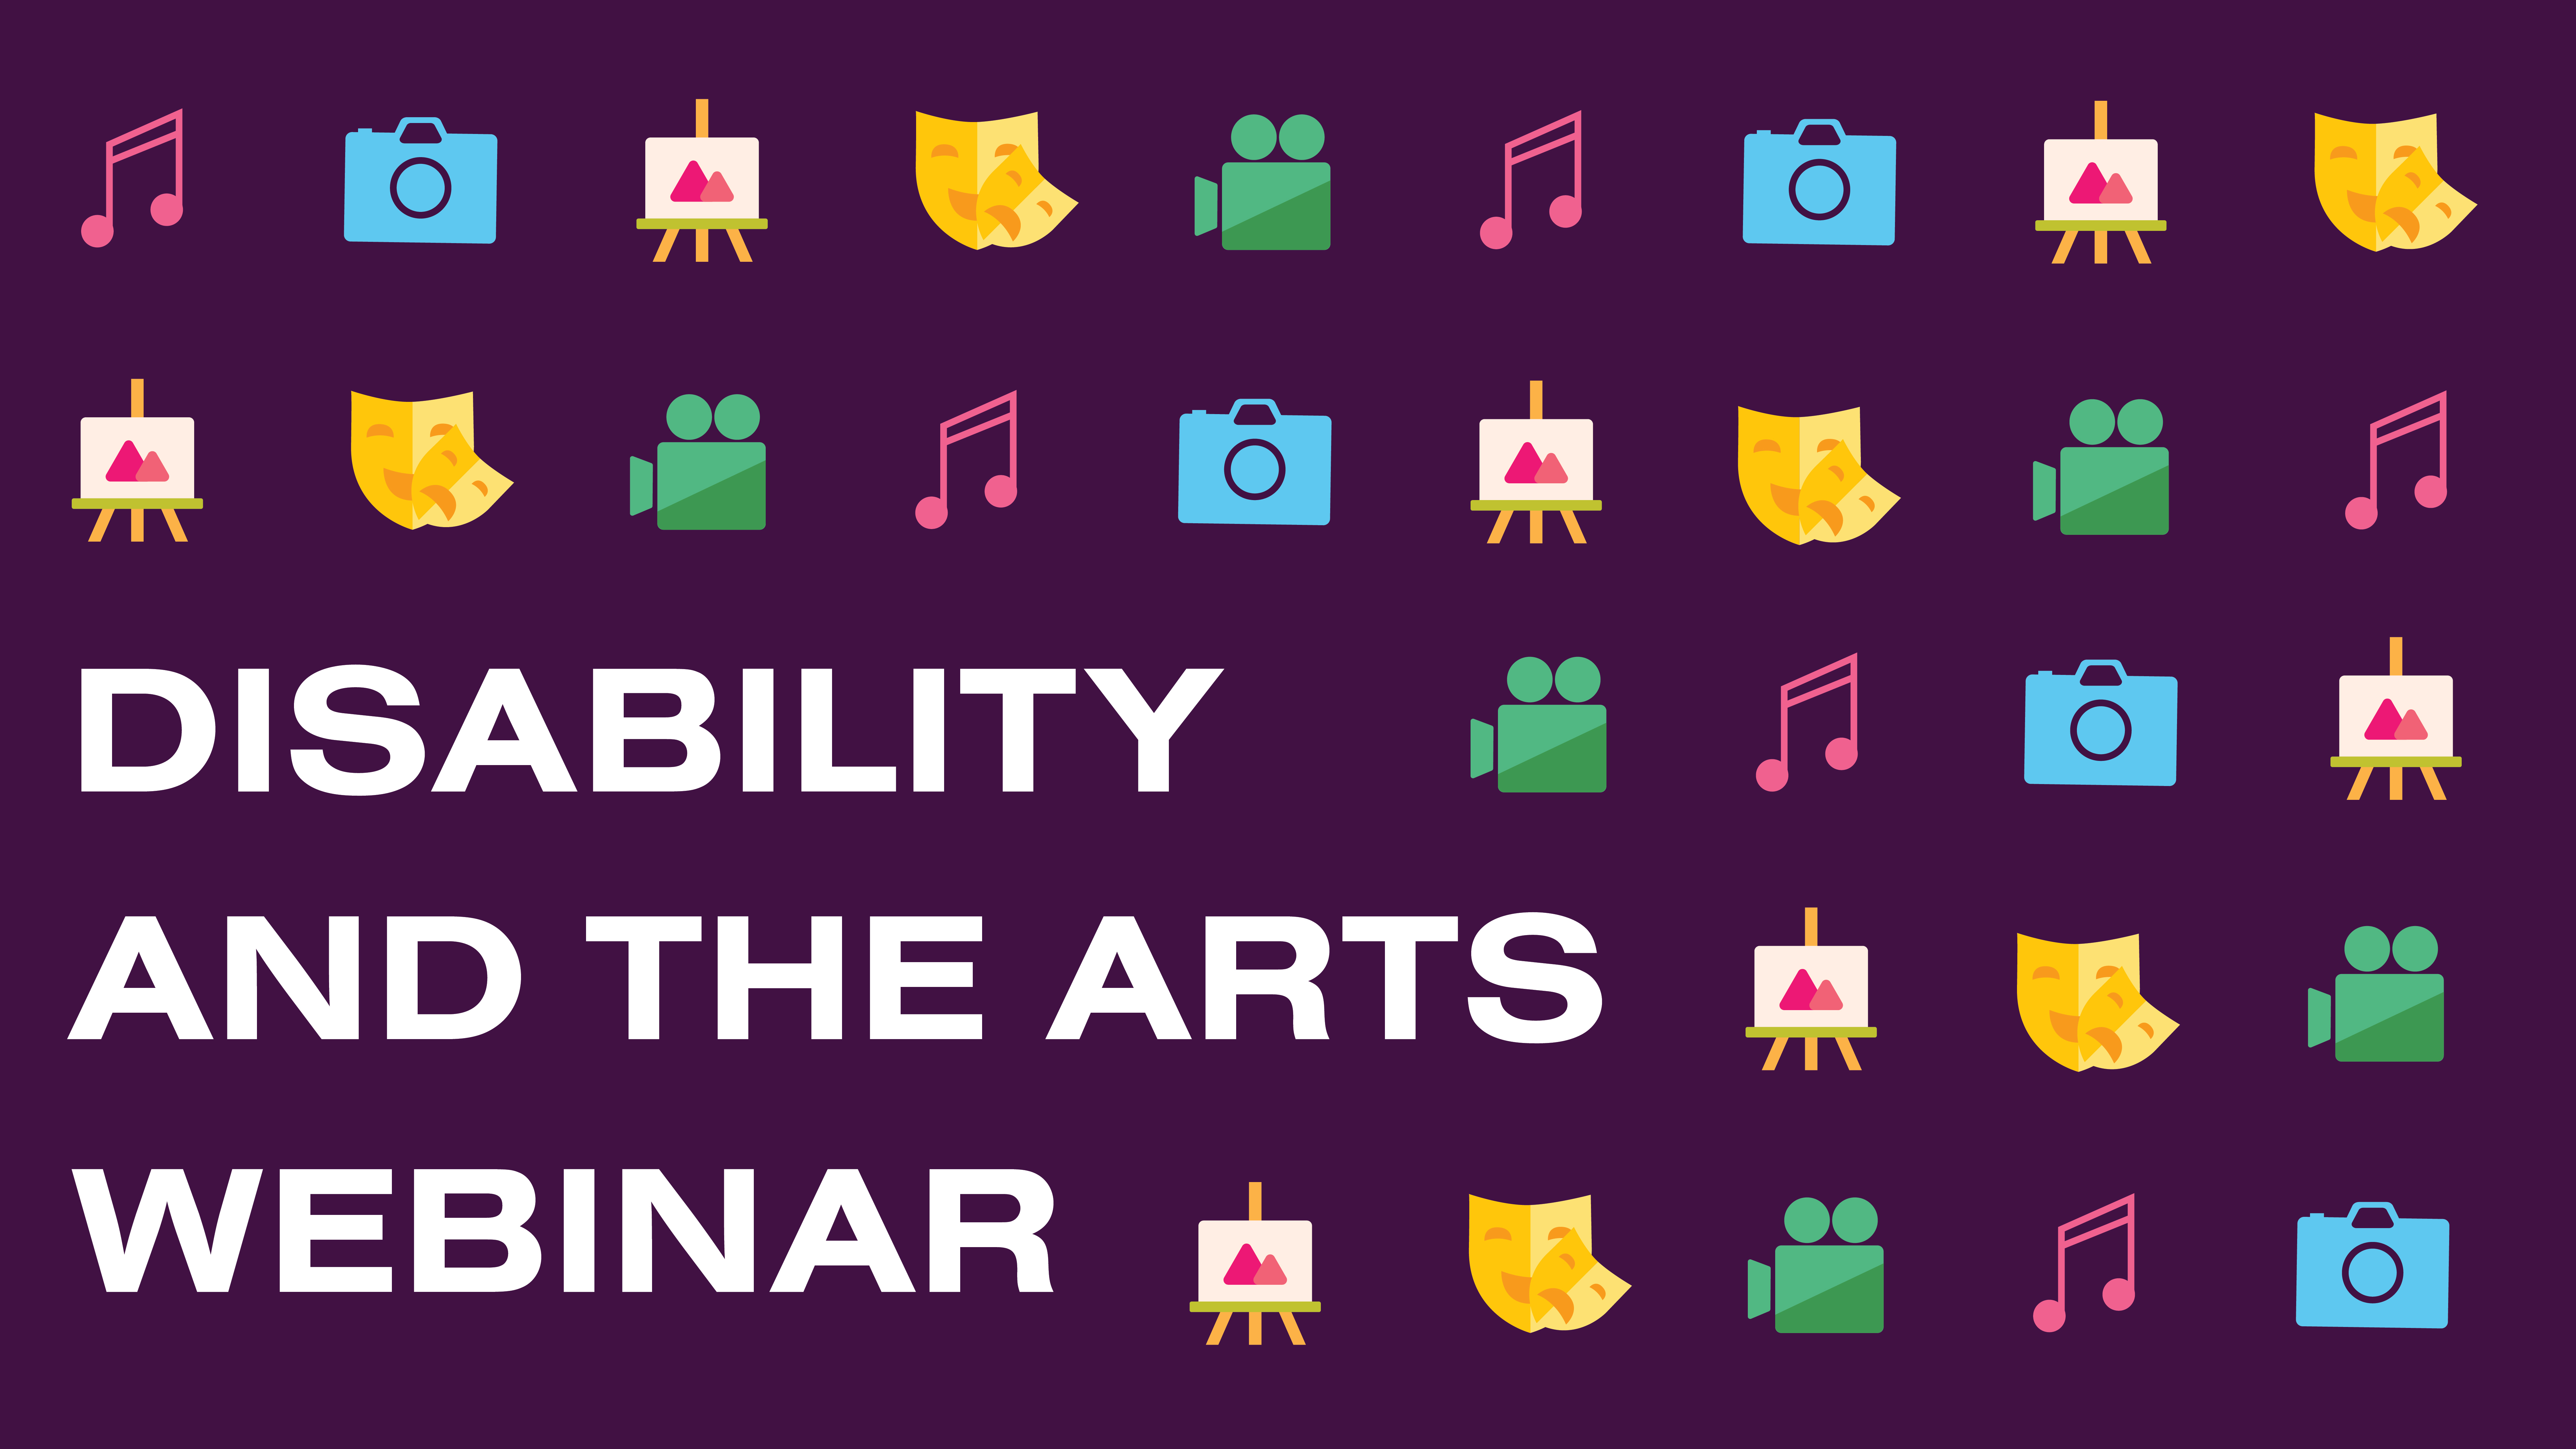 Dark purple background with white text that reads "DISABILITY AND THE ARTS WEBINAR". Music note, camera, canvas easel, theater faces, and camcorder emojis layered around text.